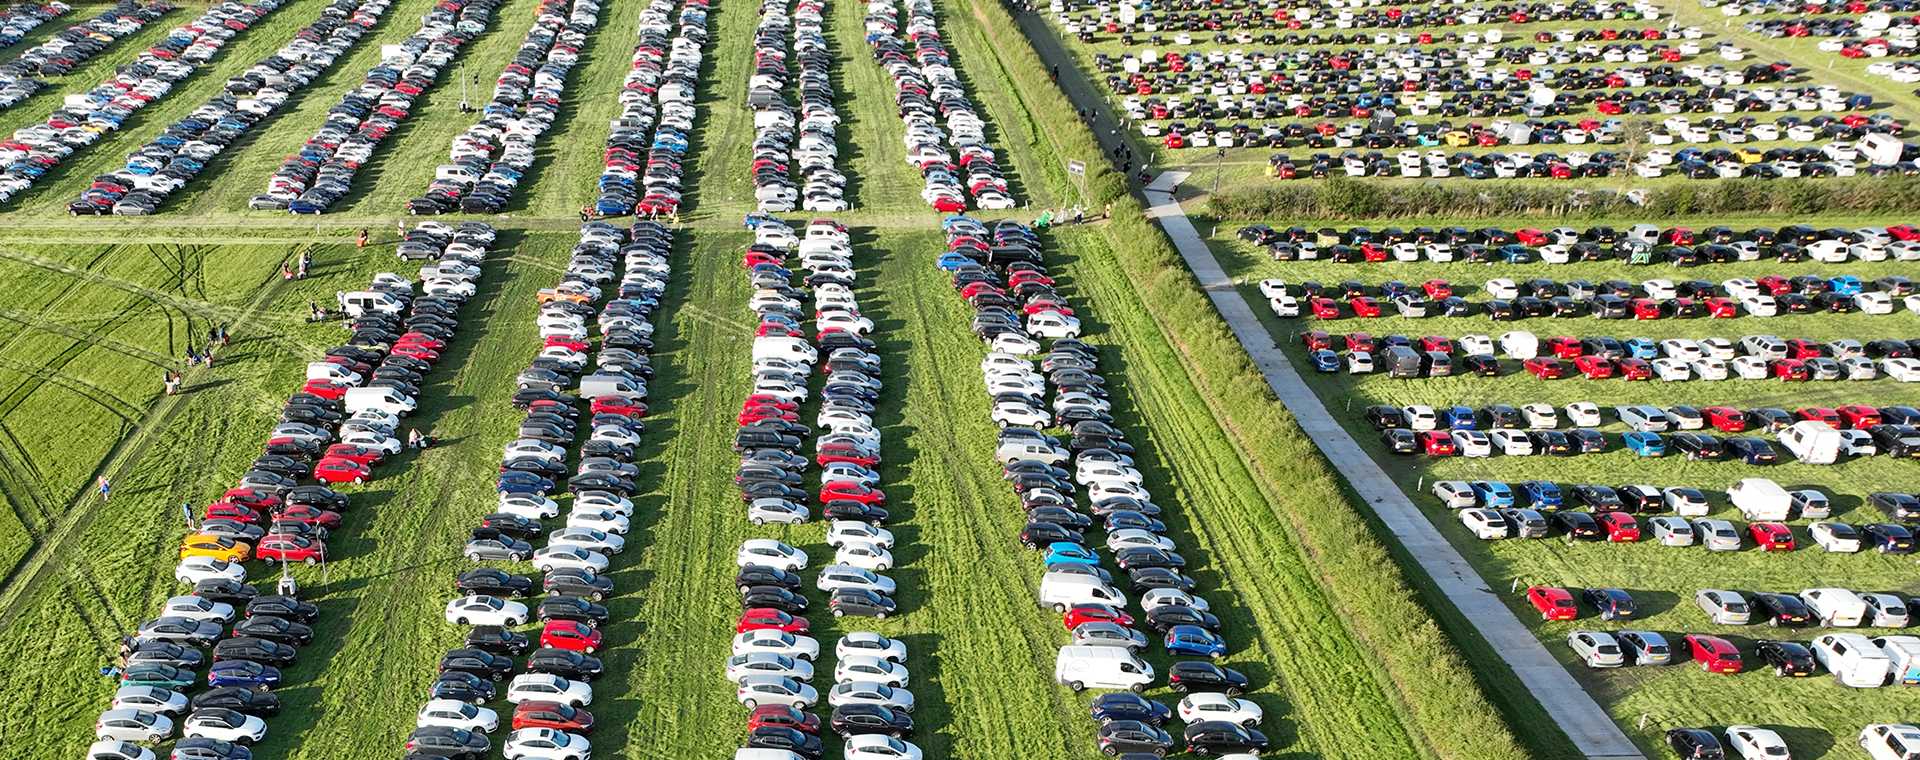 An aerial view of cars parked in a field.